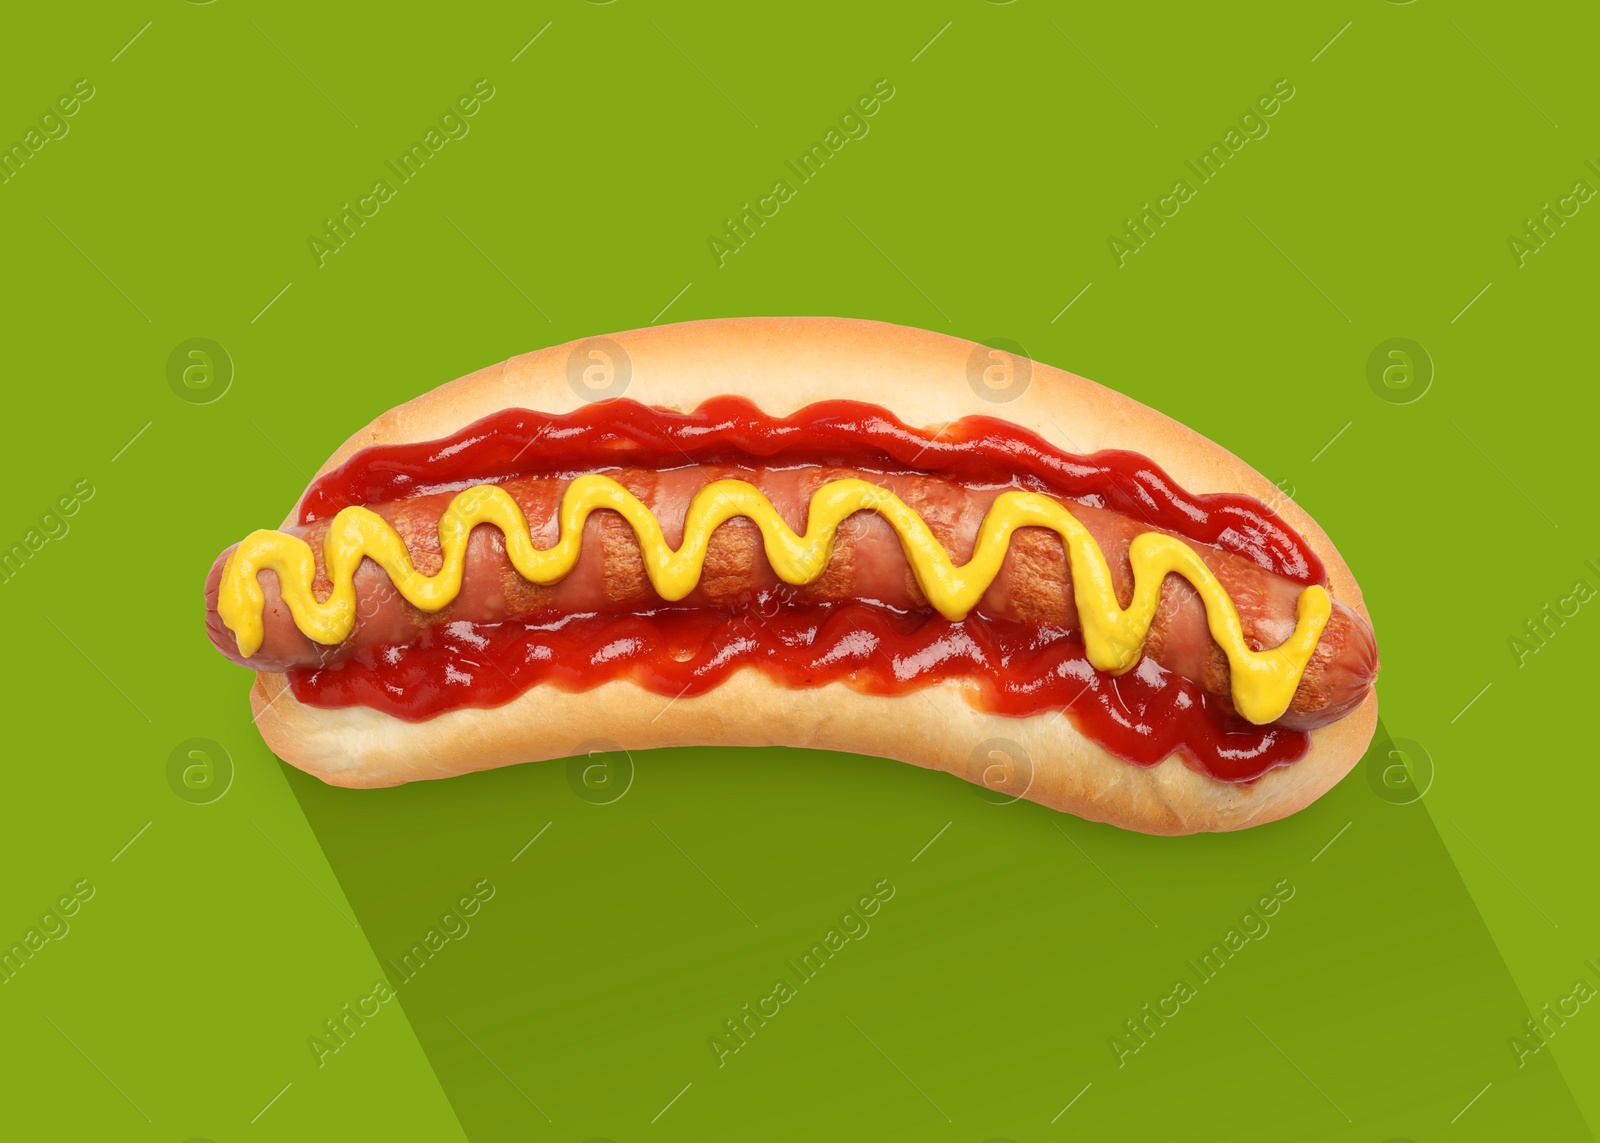 Image of Yummy hot dog with ketchup and mustard on green background